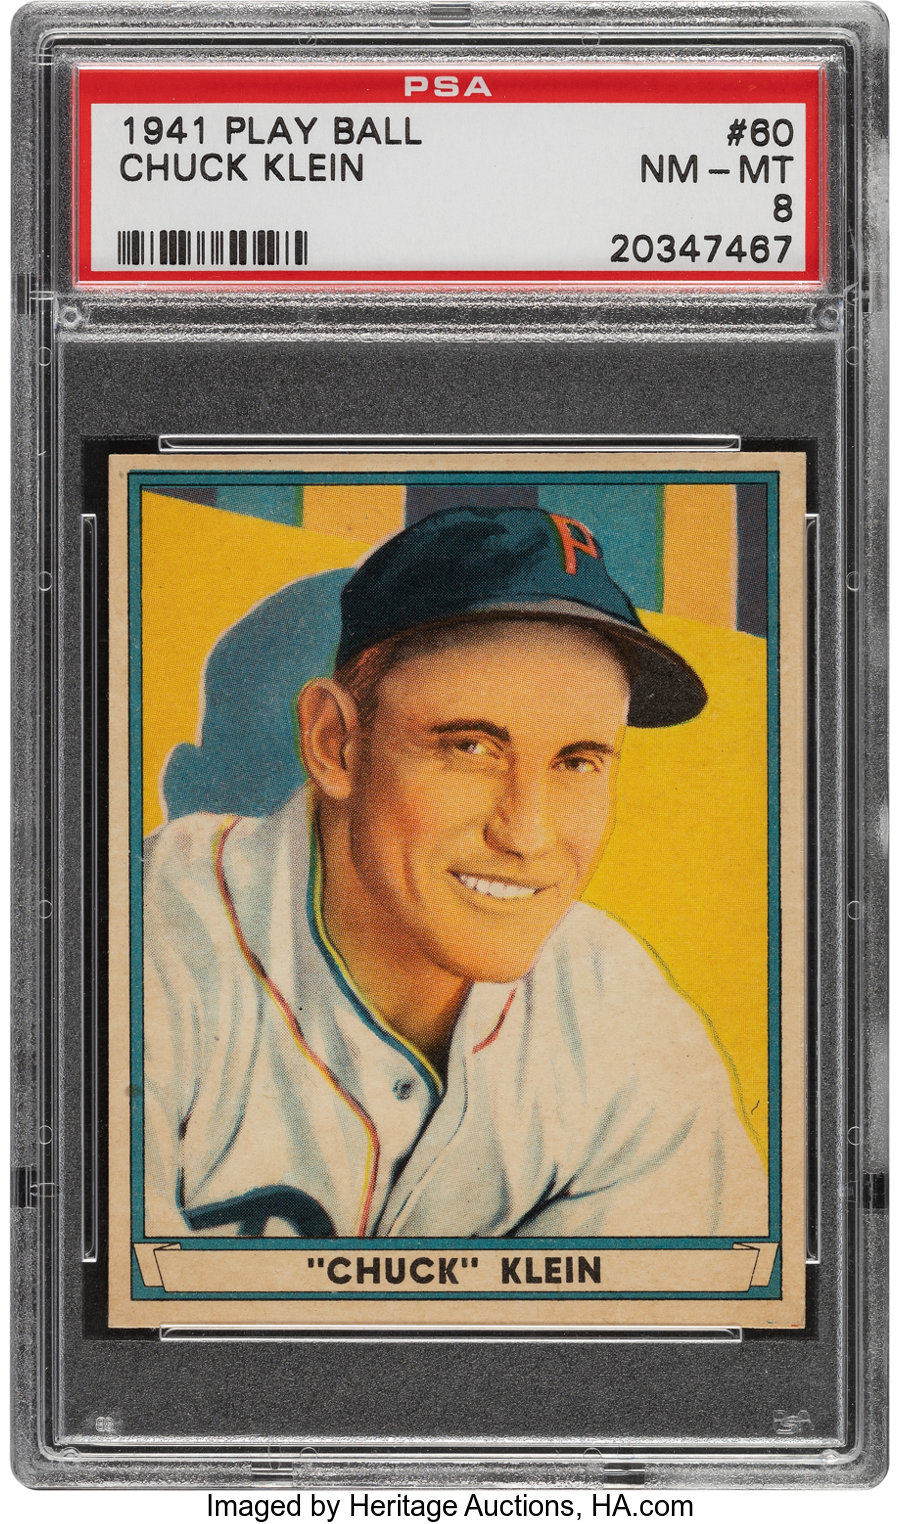 1941 Play Ball Chuck Klein #60 PSA NM-MT 8 - Only Two Higher!